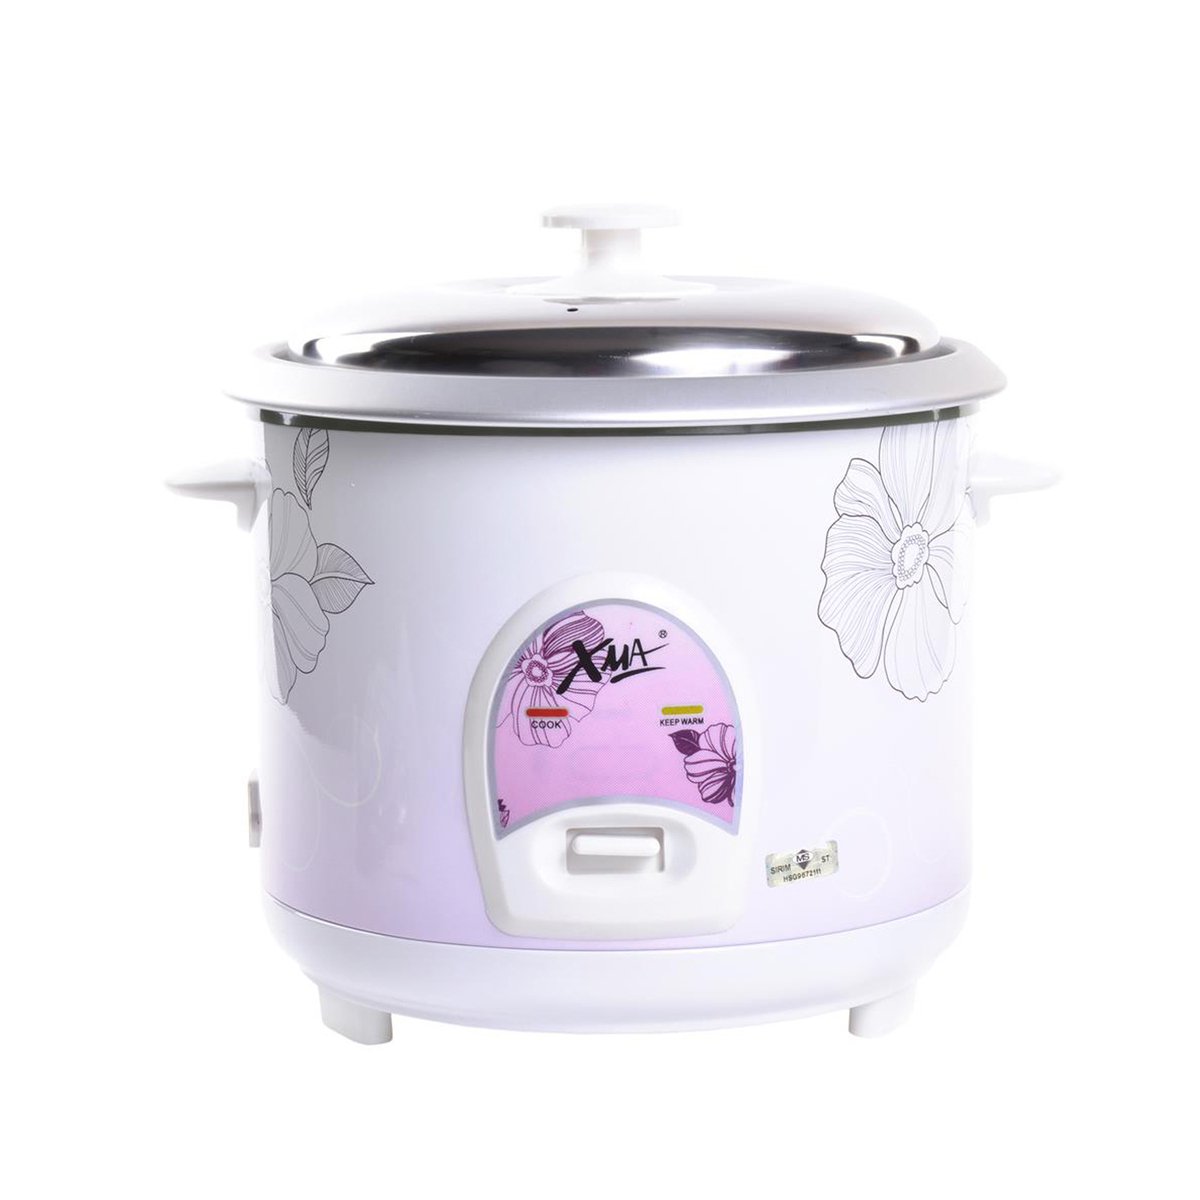 Xma Rice Cooker 1.8Litre  188Rc